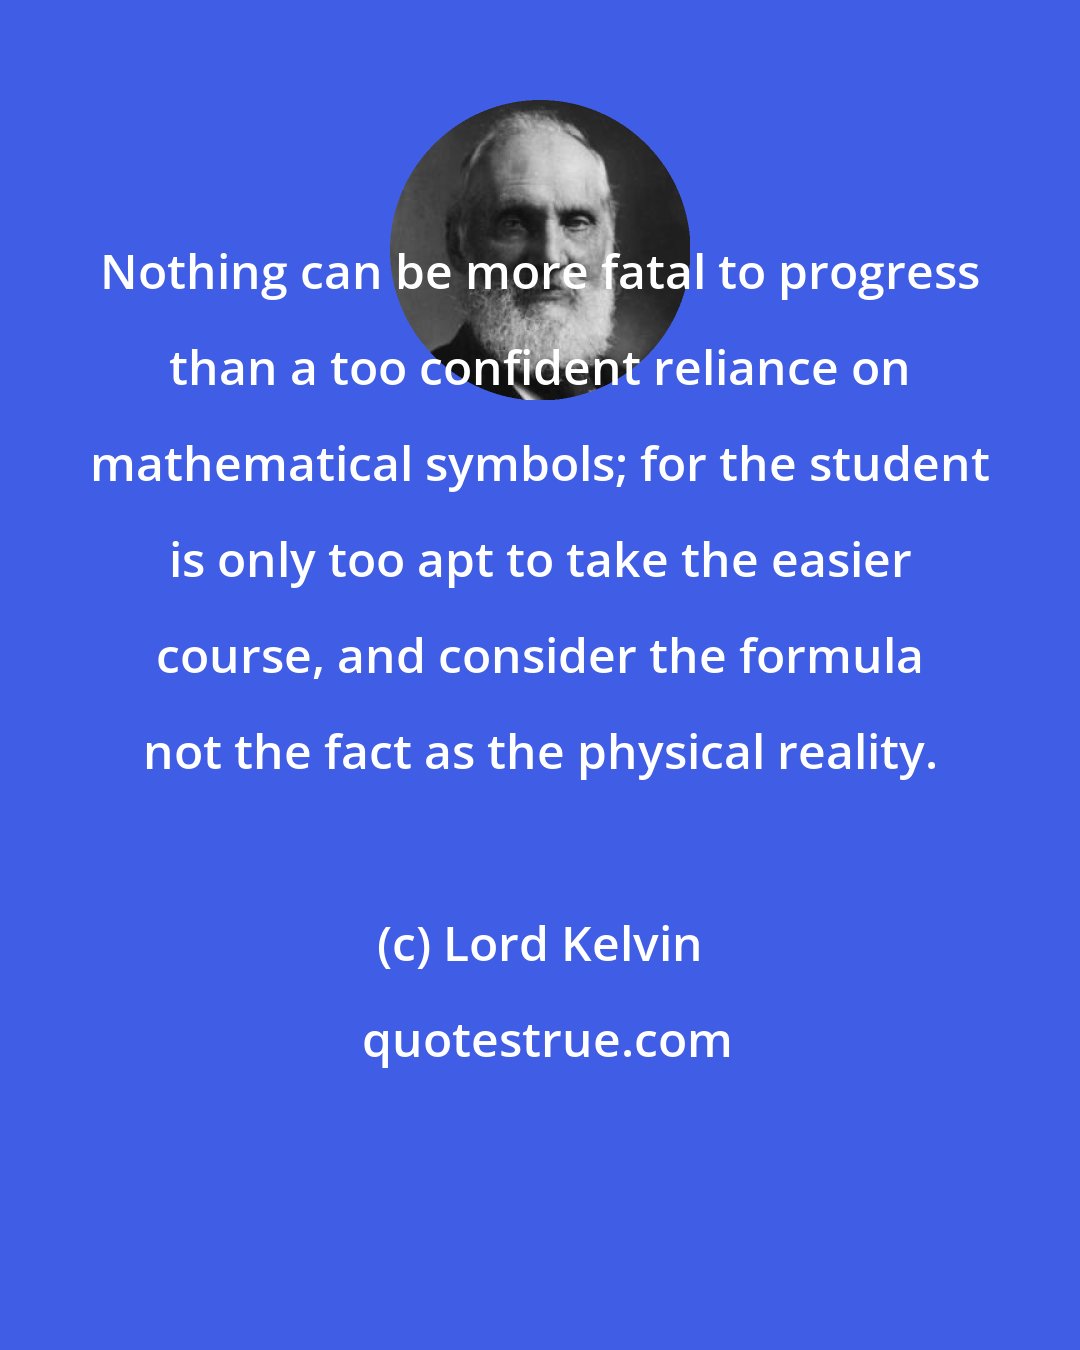 Lord Kelvin: Nothing can be more fatal to progress than a too confident reliance on mathematical symbols; for the student is only too apt to take the easier course, and consider the formula not the fact as the physical reality.